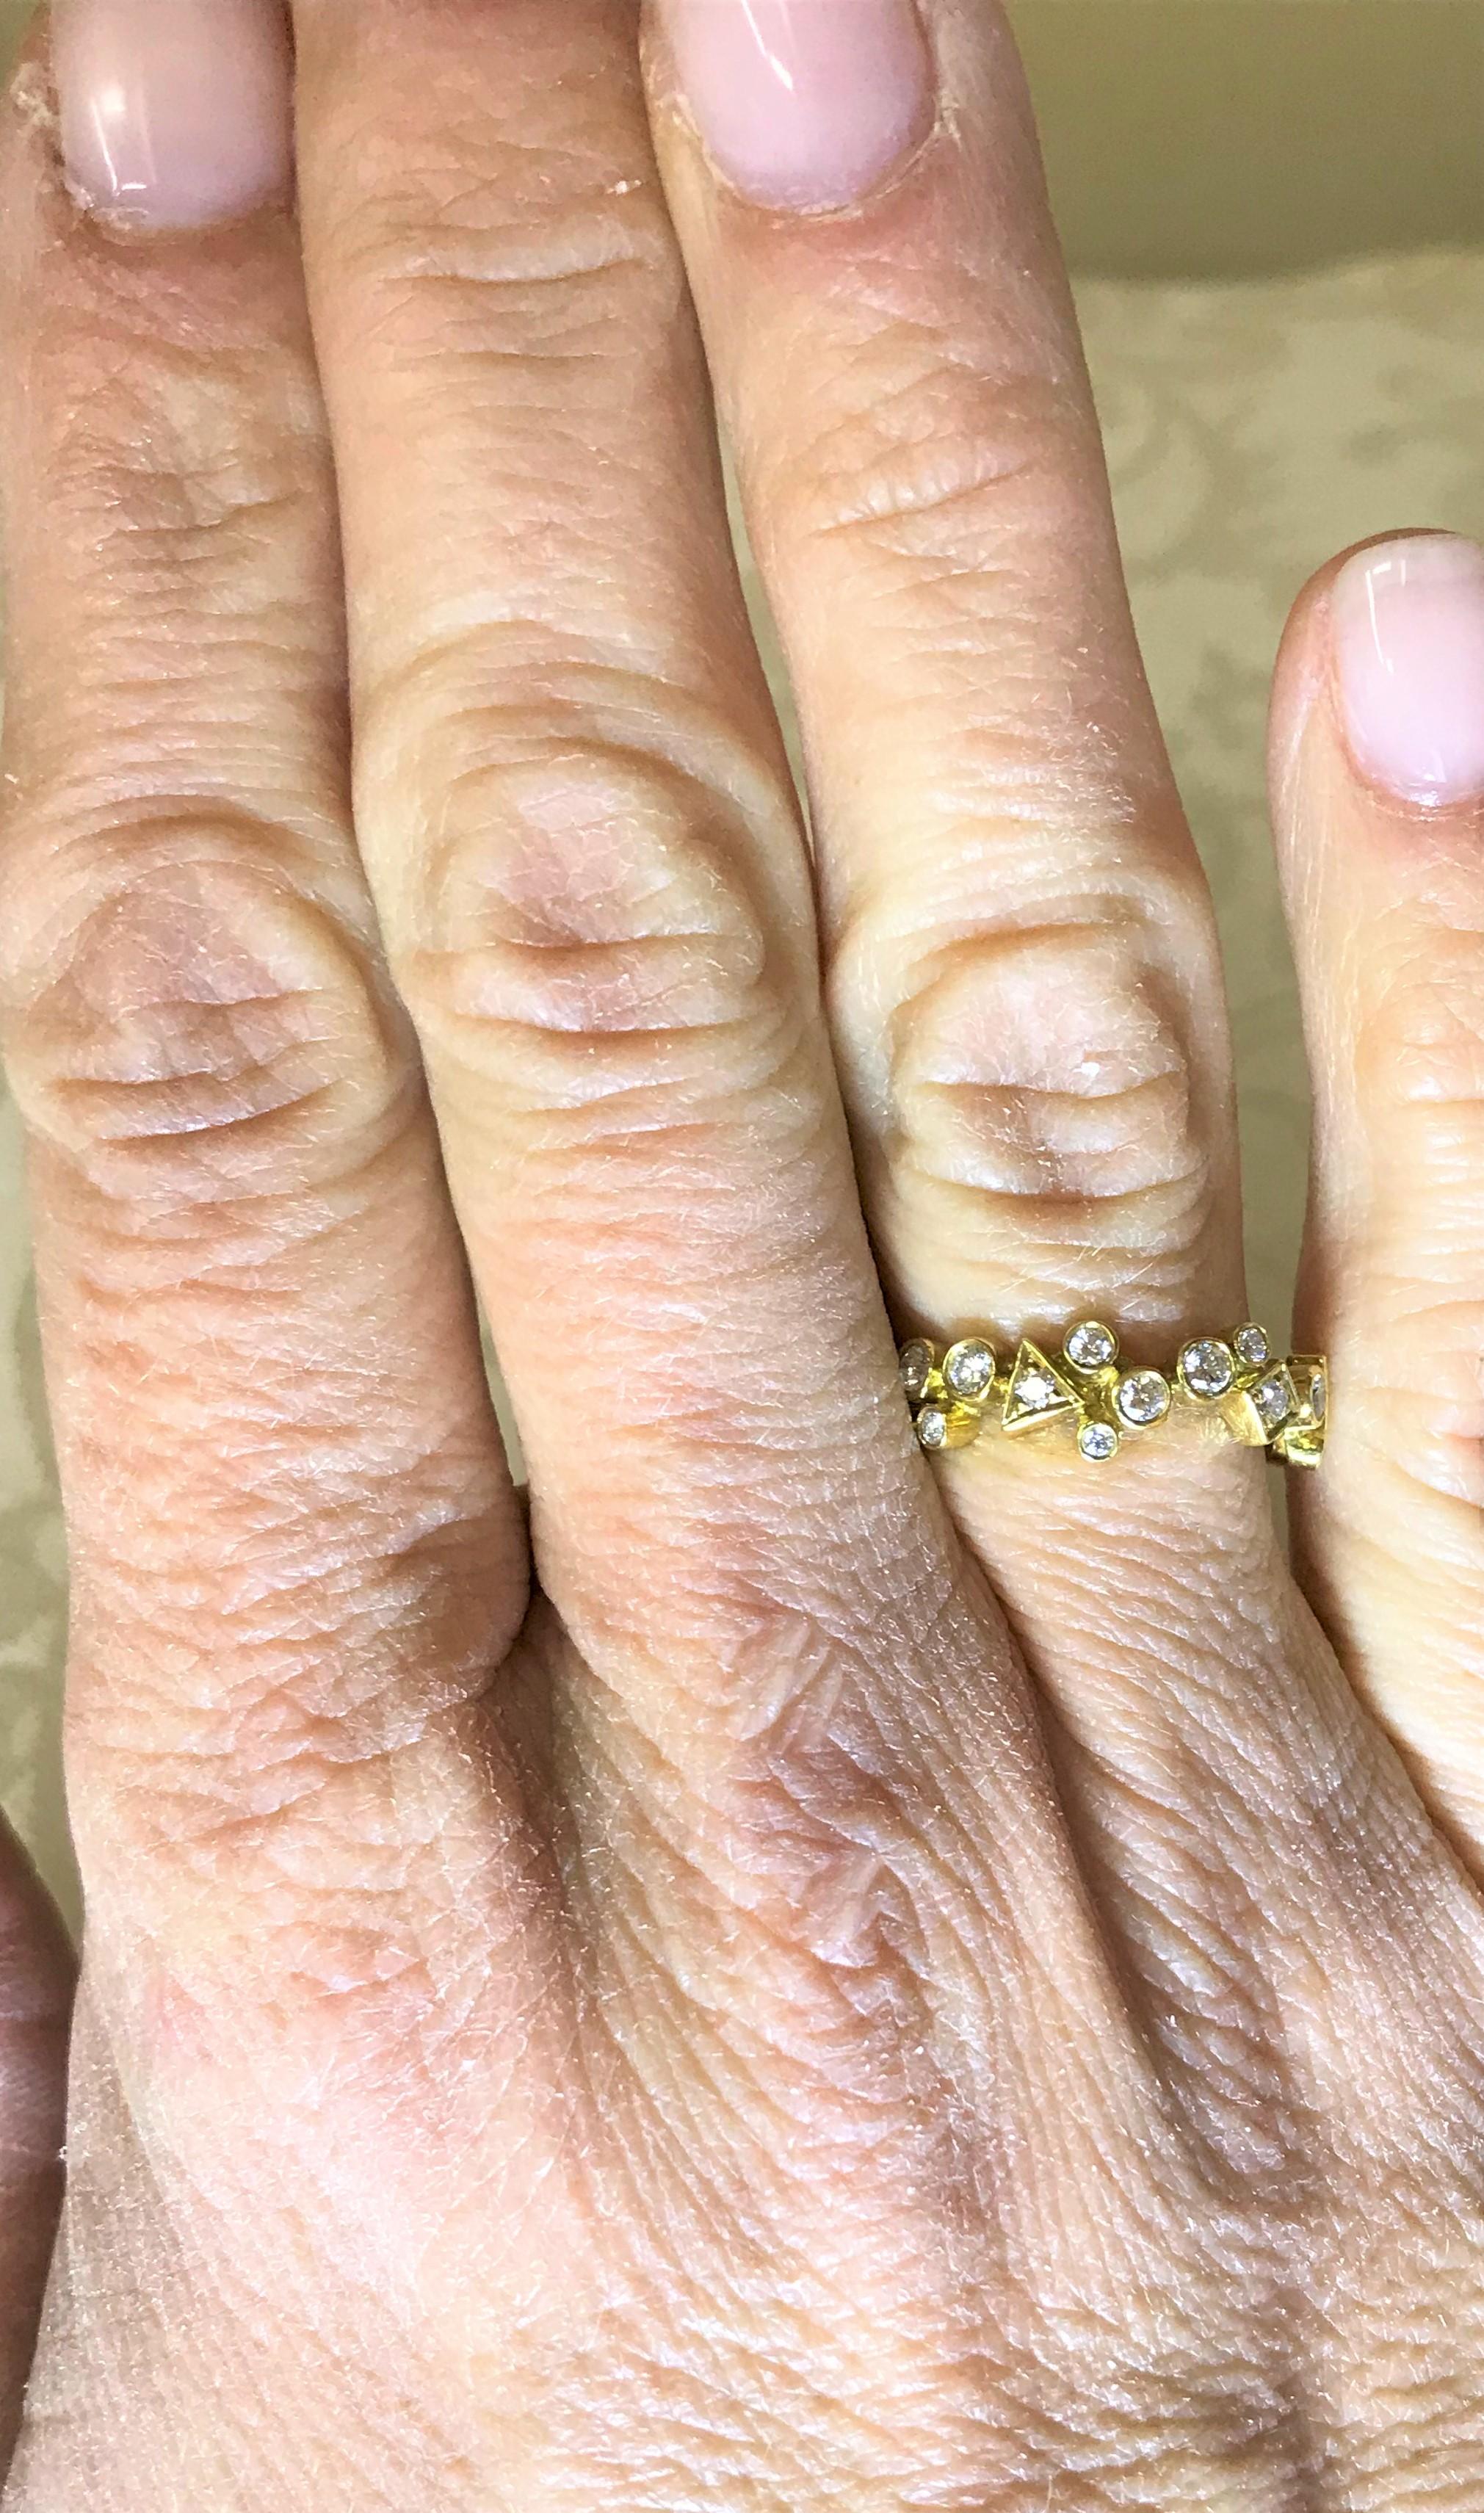 This amazing ring is whimsical and sophisticated! 
Ring by designer Seiden Gang, Jubilee Collection 
18 karat yellow gold
29  round diamonds, approximately .67 total diamond weight
Each diamond set in a round, heart, triangle or square shape
Stamped